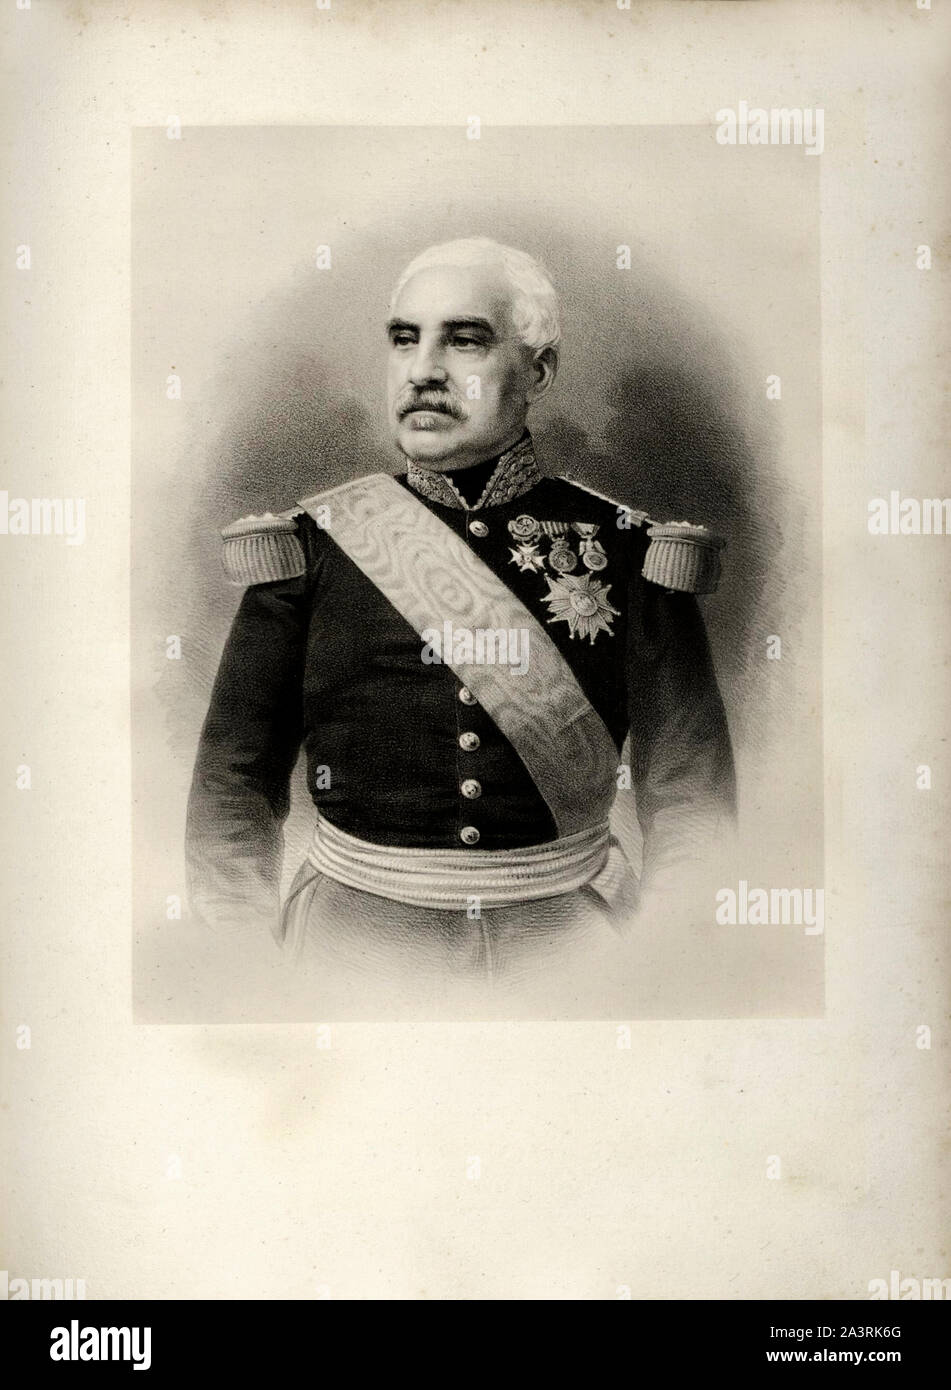 Aimable-Jean-Jacques Pelissier, 1st Duc de Malakoff (1794 – 1864), was a Marshal of France. Commander-in-chief of the French forces before the Siege o Stock Photo